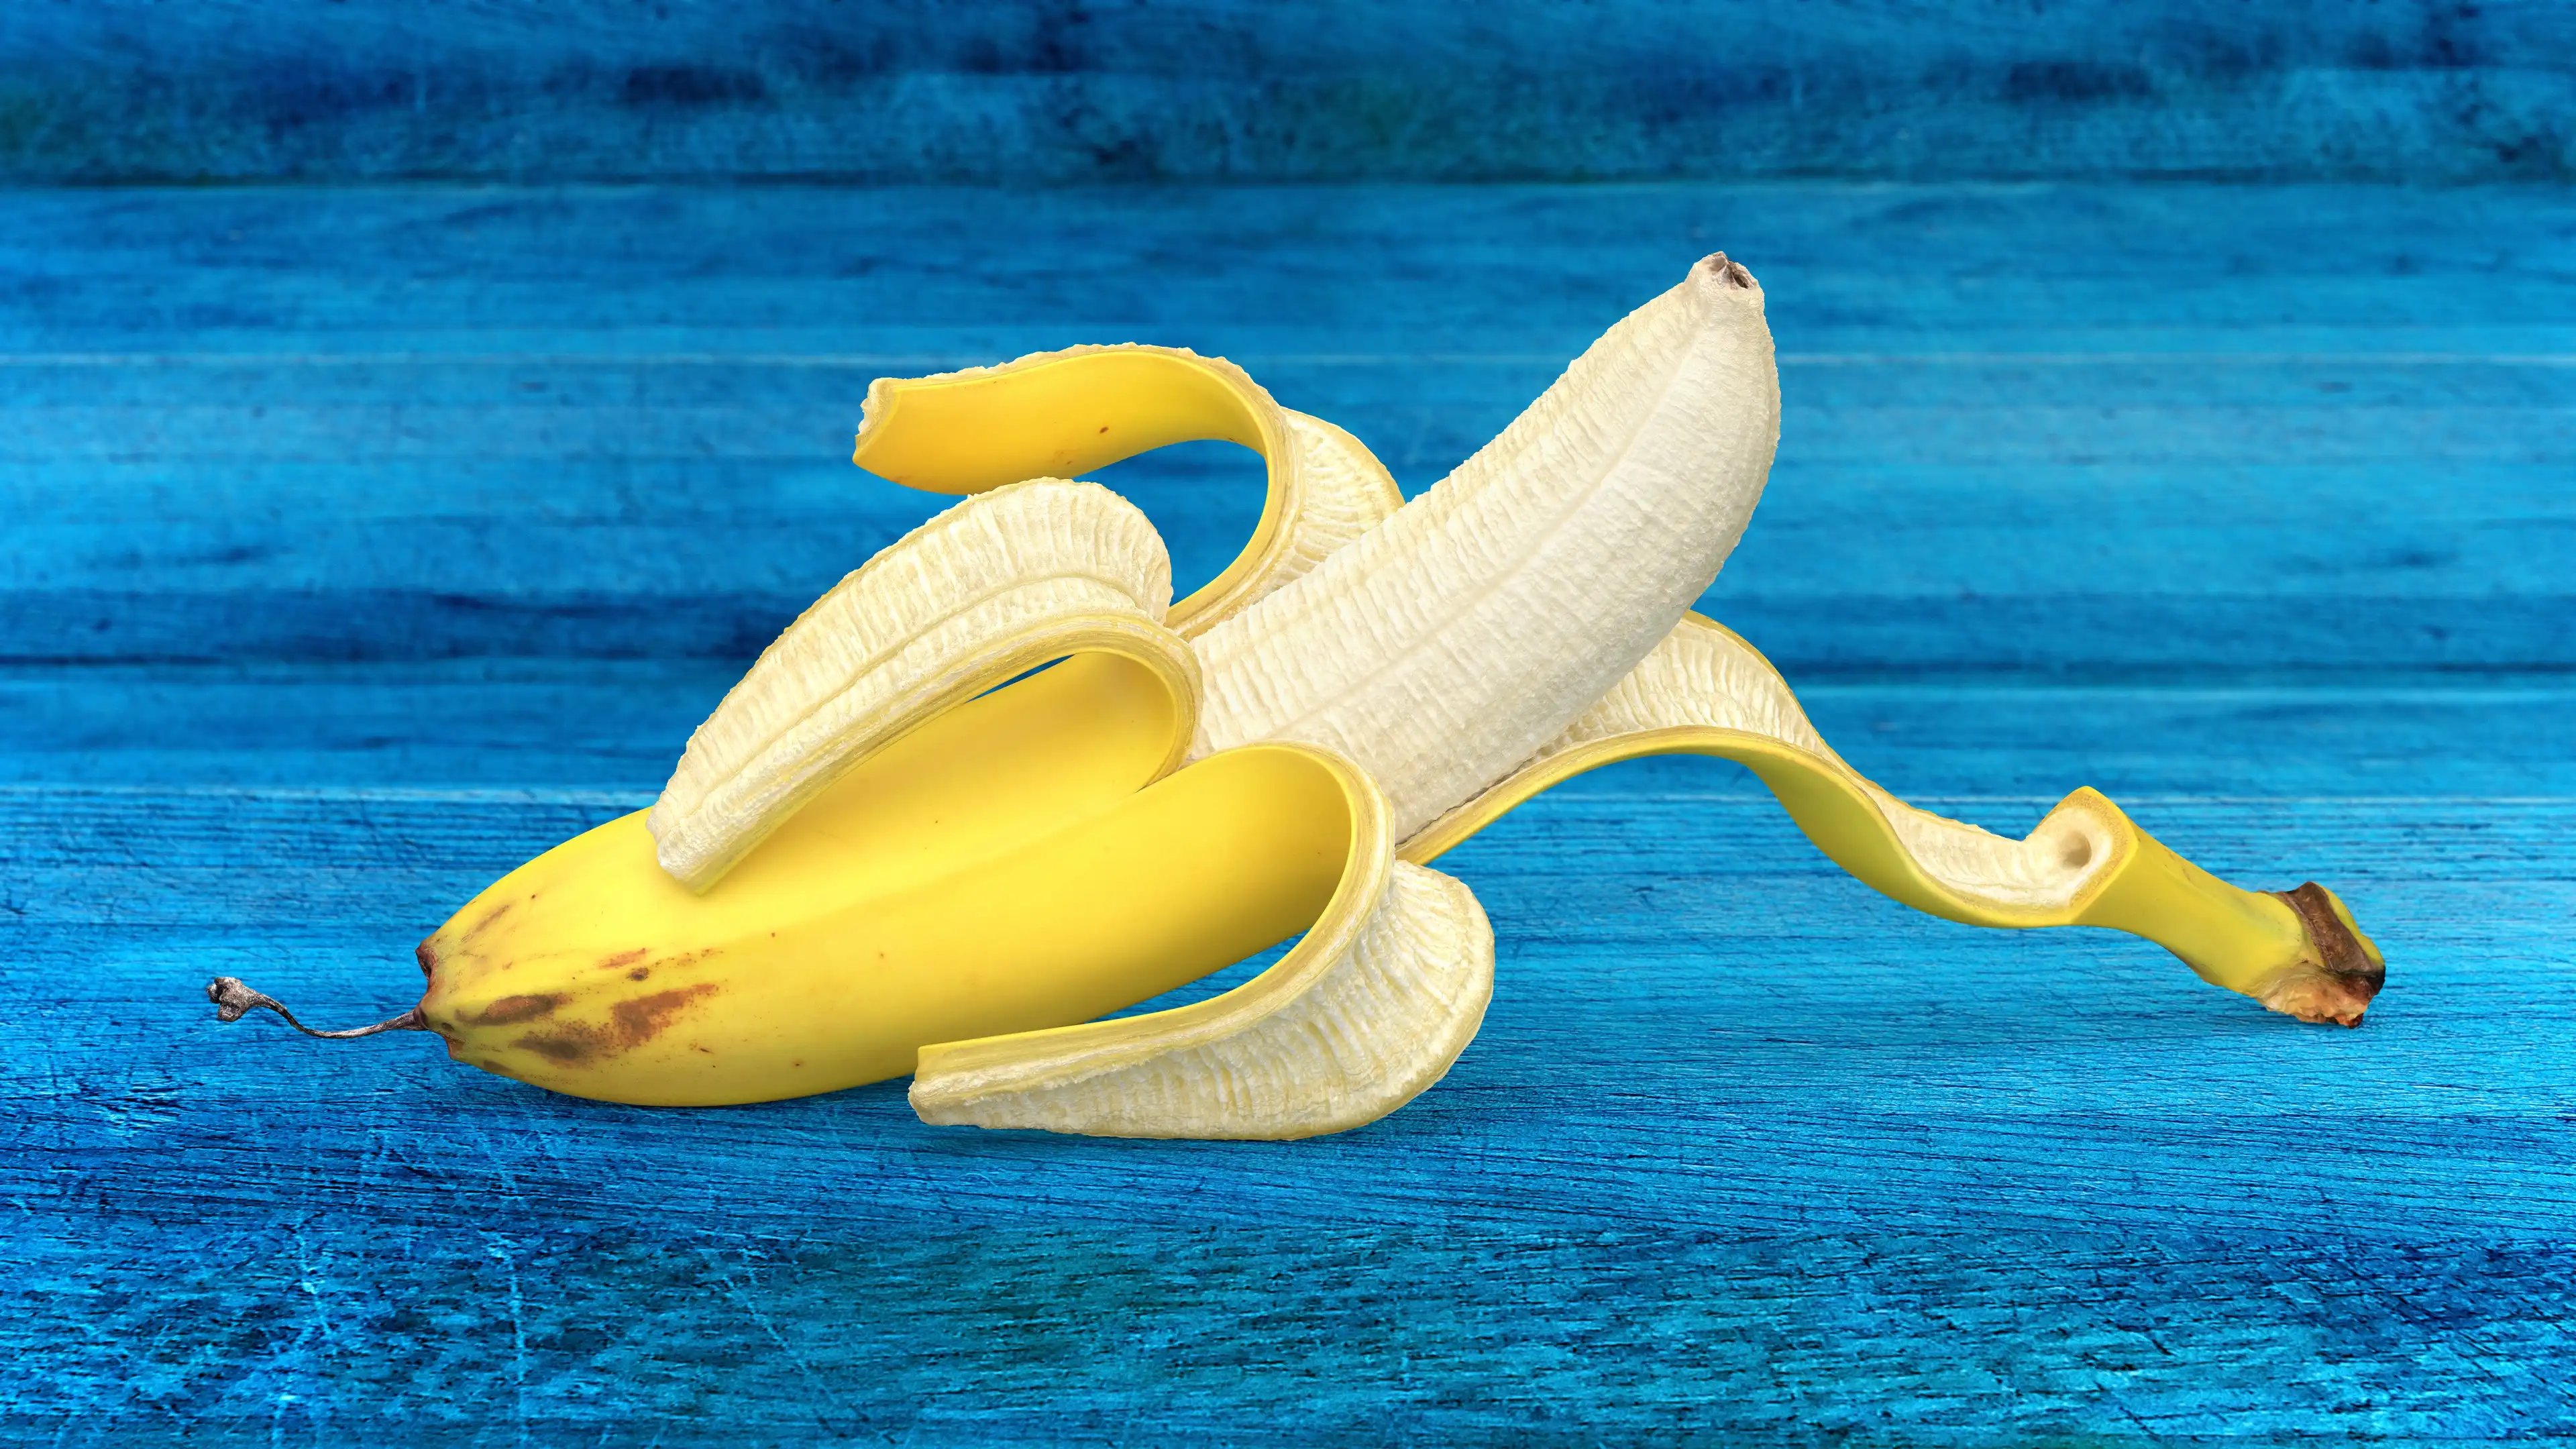 photorealistic scanned banana 3d model with a traditional style of peel opening on blue wooden boards